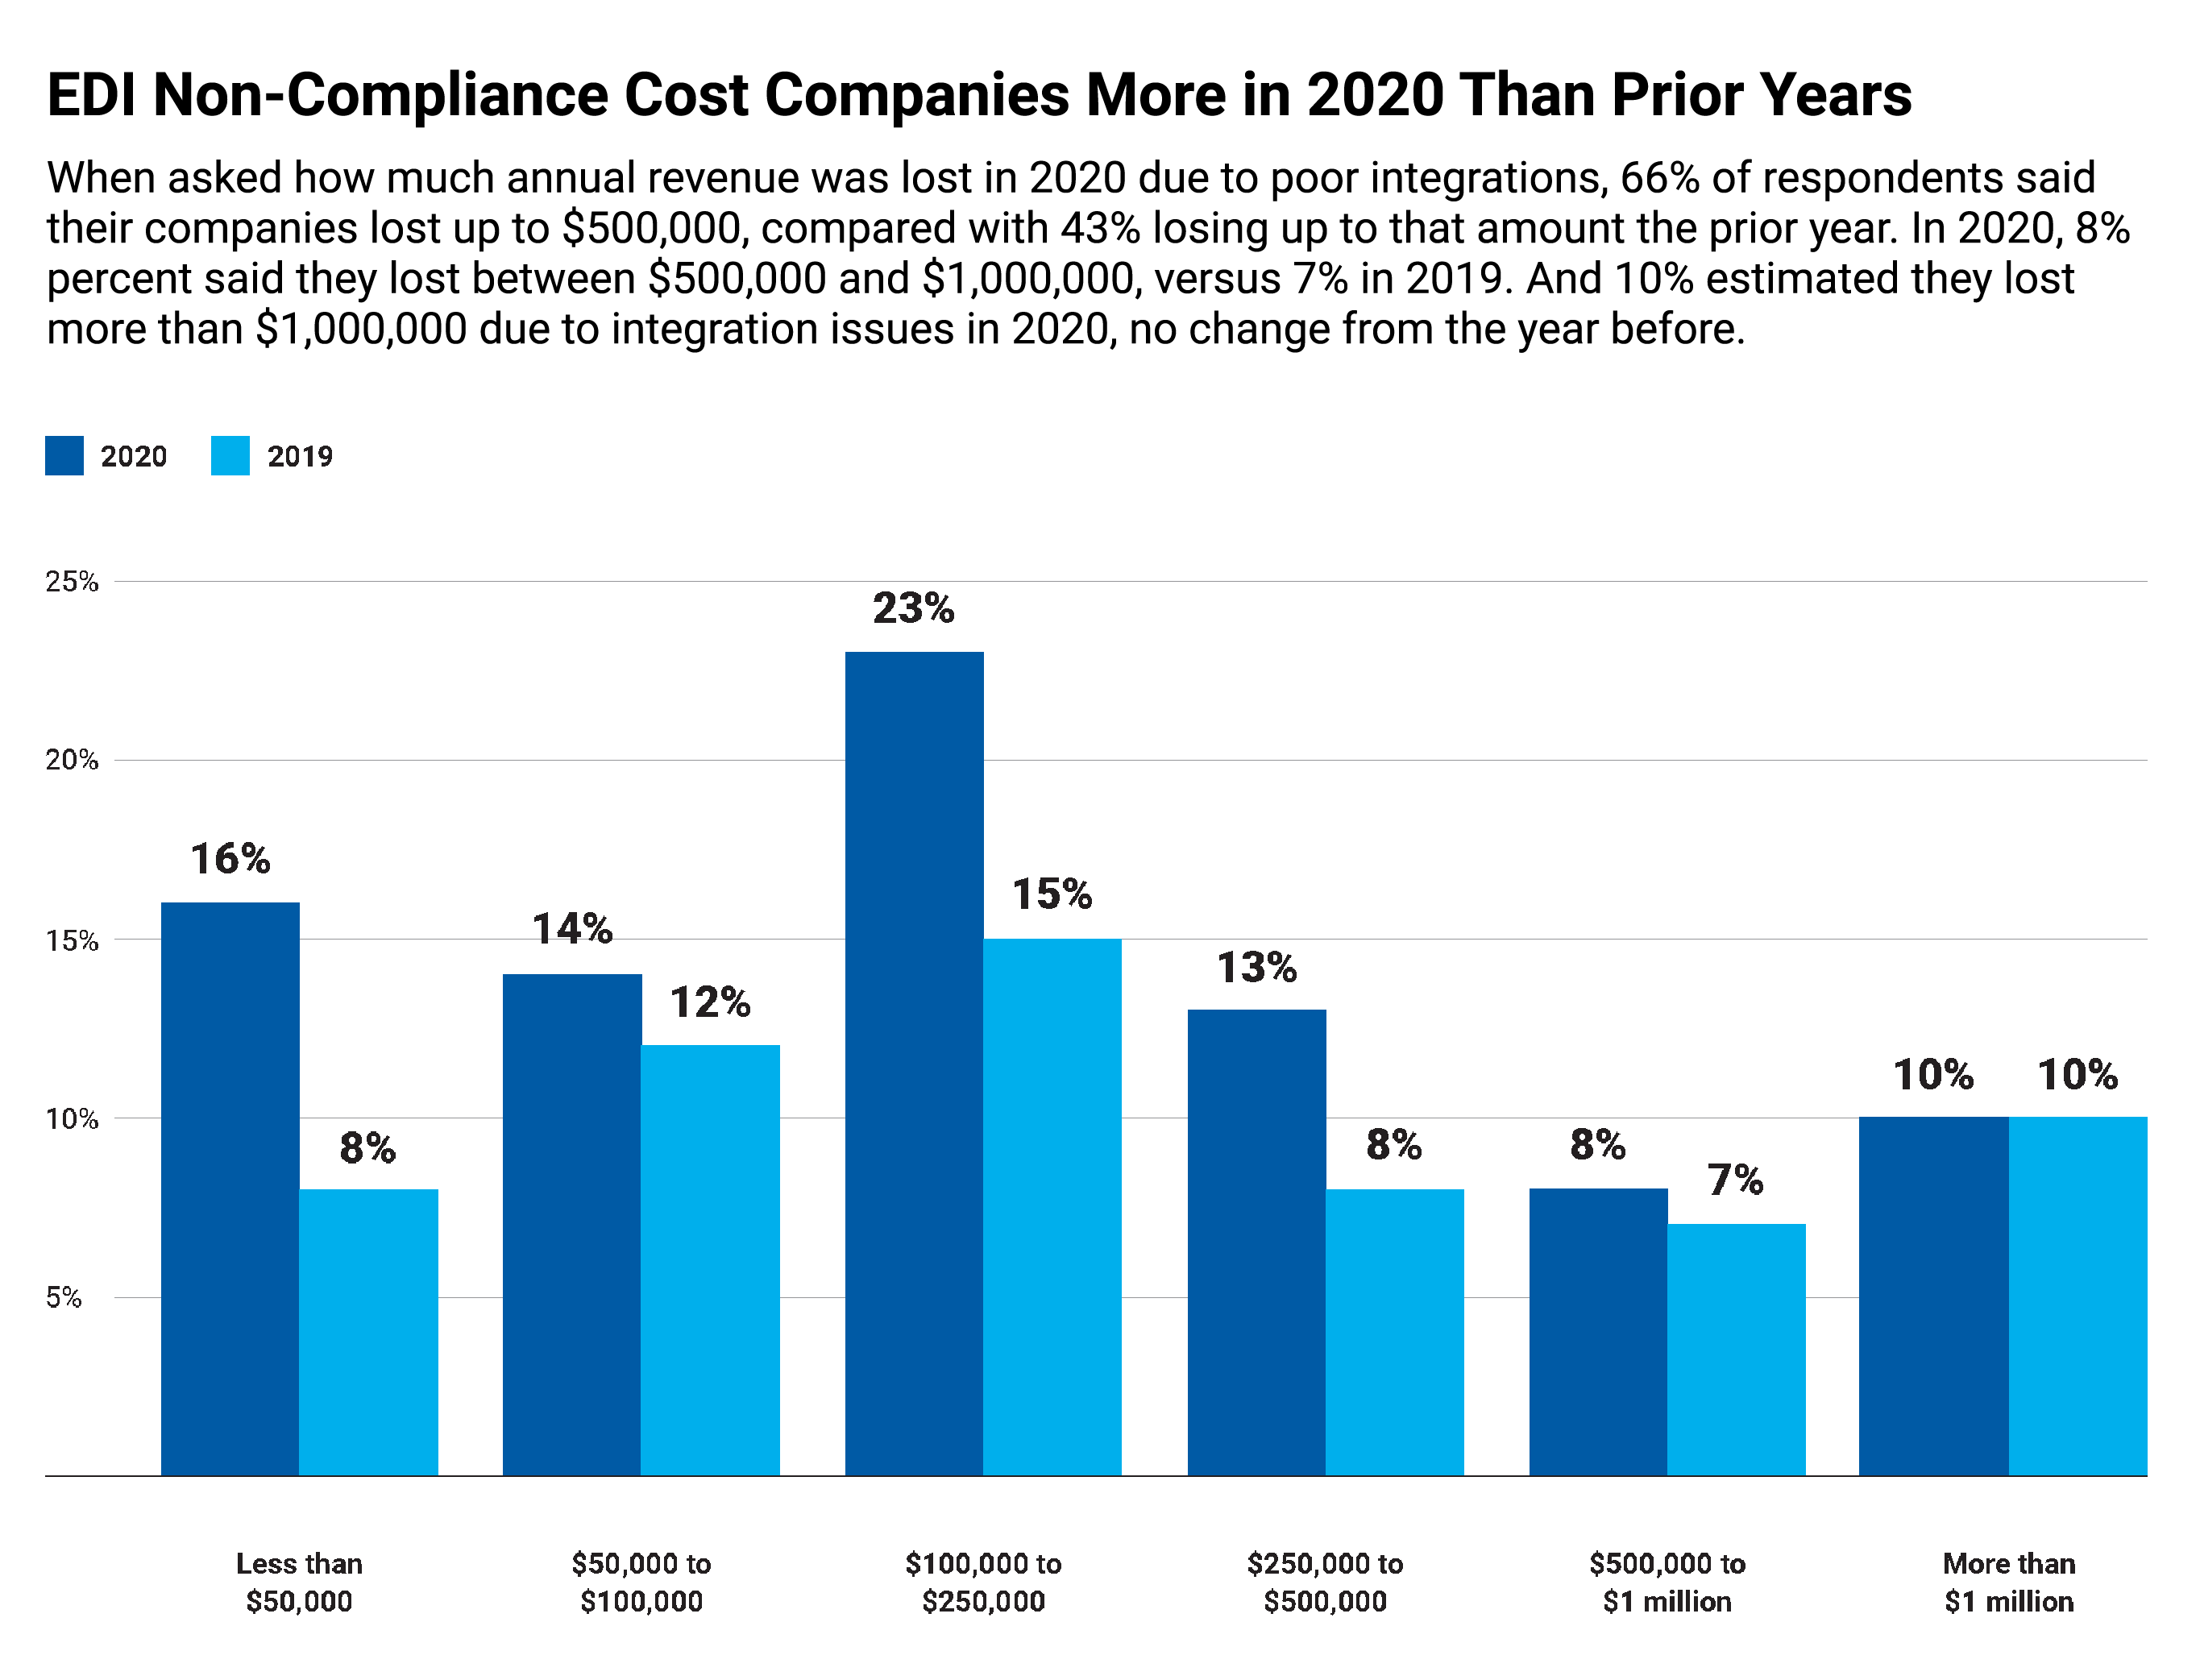 The cost of EDI non-compliance by the numbers